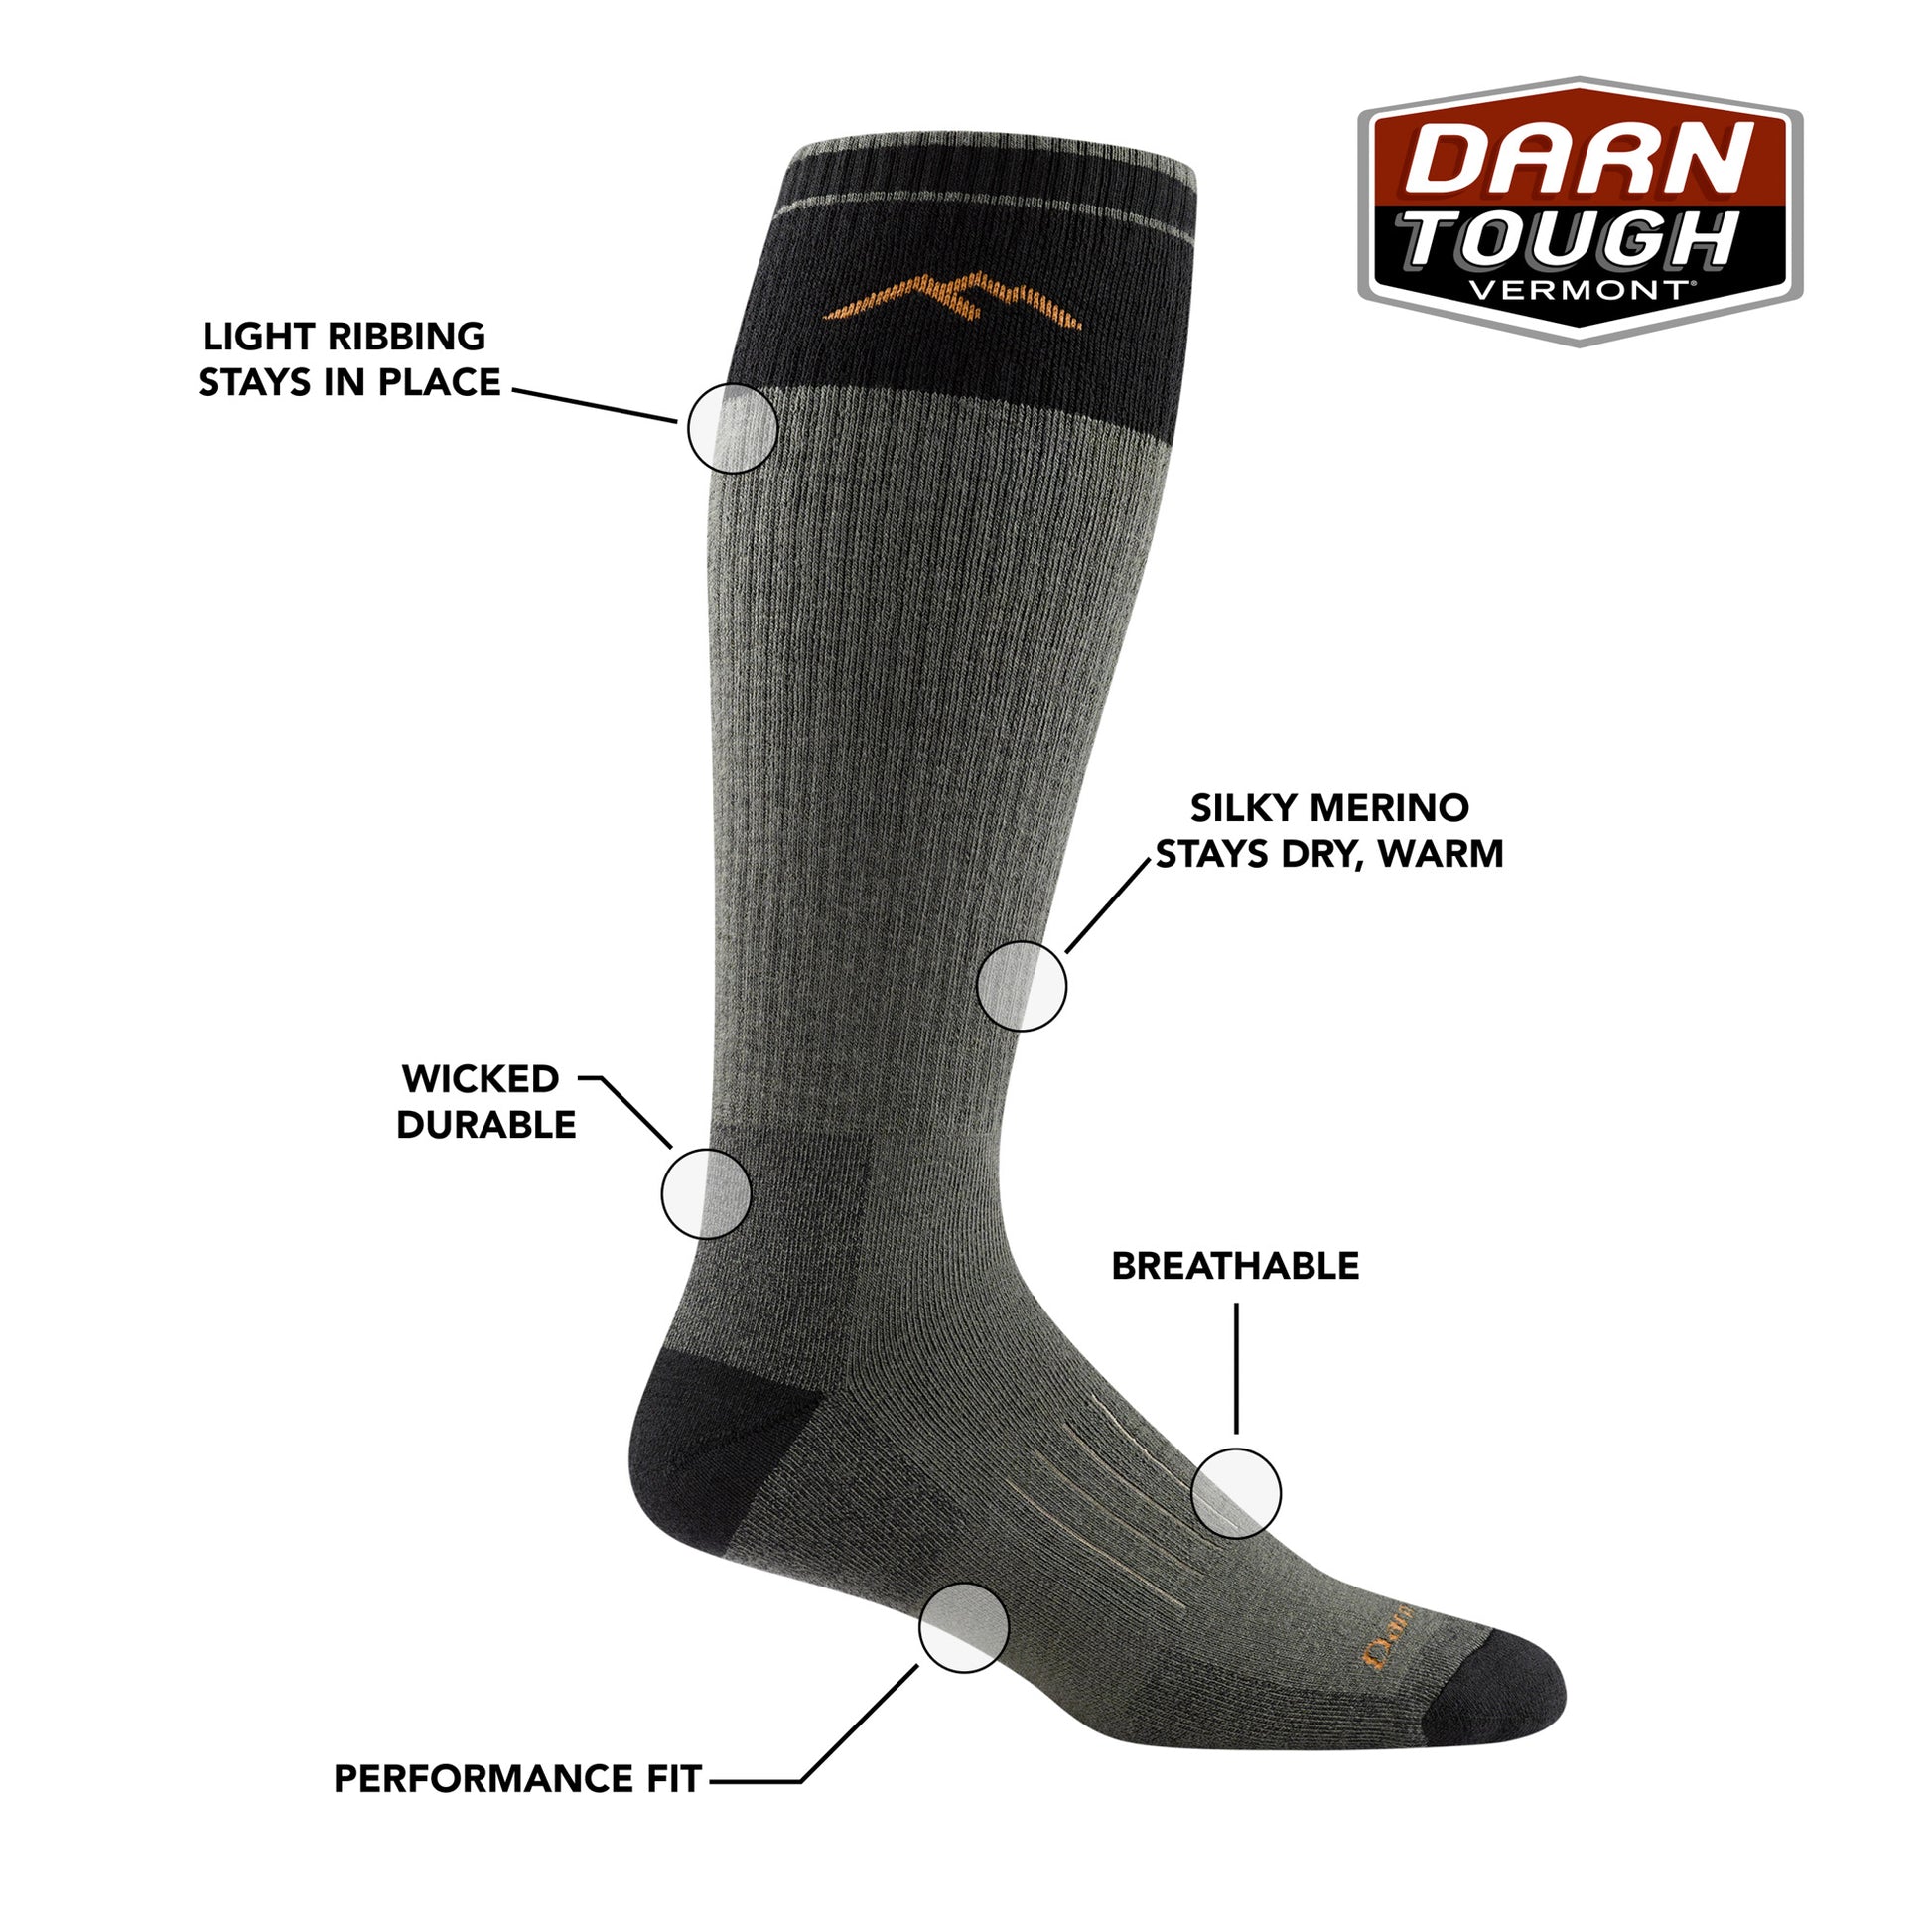 Darn Tough Over-the-Calf Heavyweight Hunting Sock features. Light Ribbing, wicked durable, silky merino stays dry and warm, breathable, performance fit.